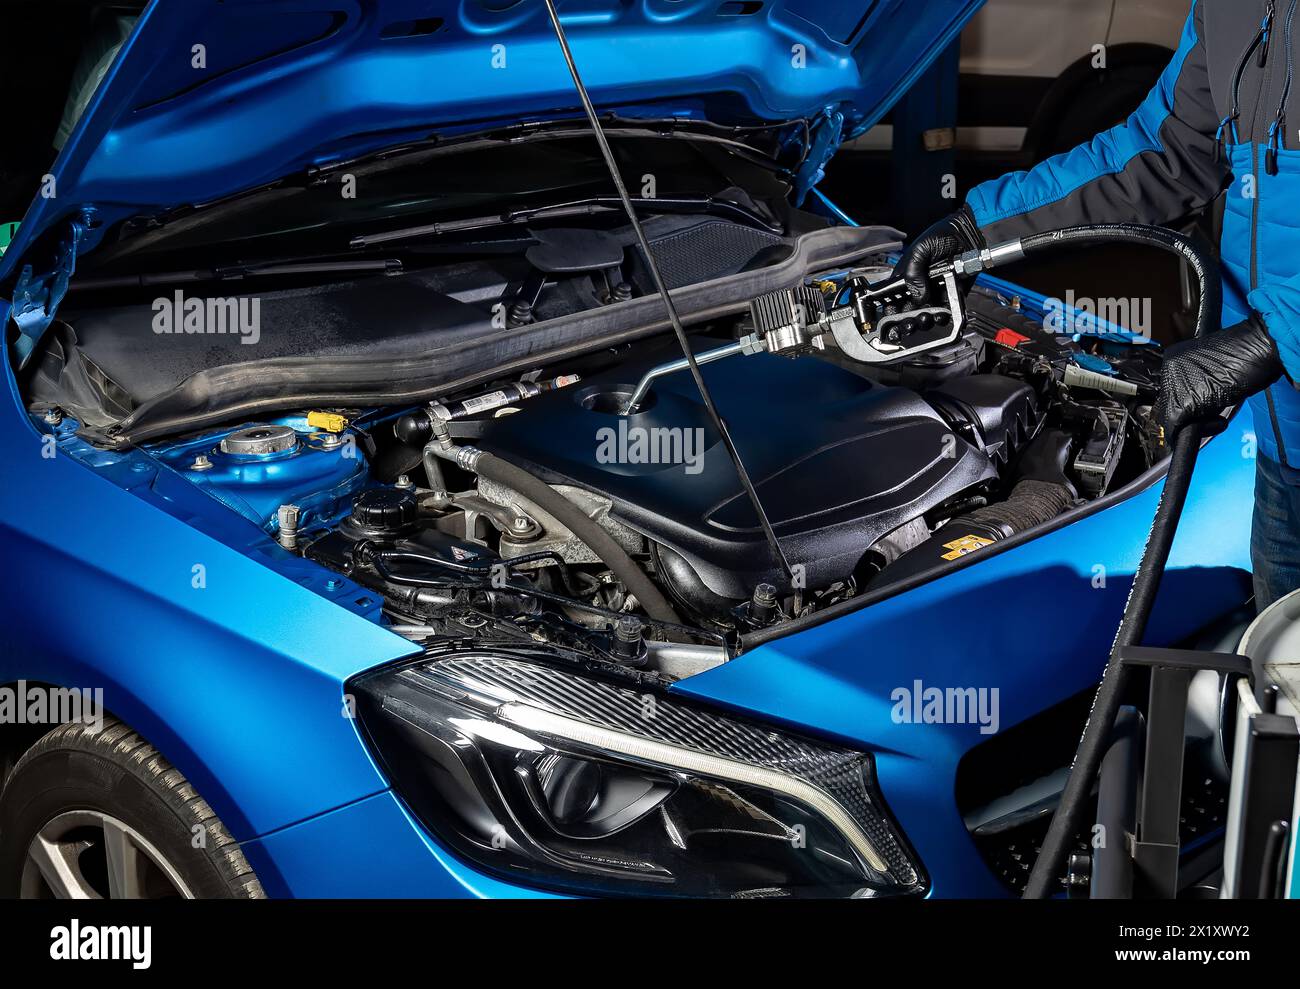 Automotive maintenance in action as a mechanic fills the engine of a blue car with fresh oil through an open hood using an oil pump after draining the Stock Photo